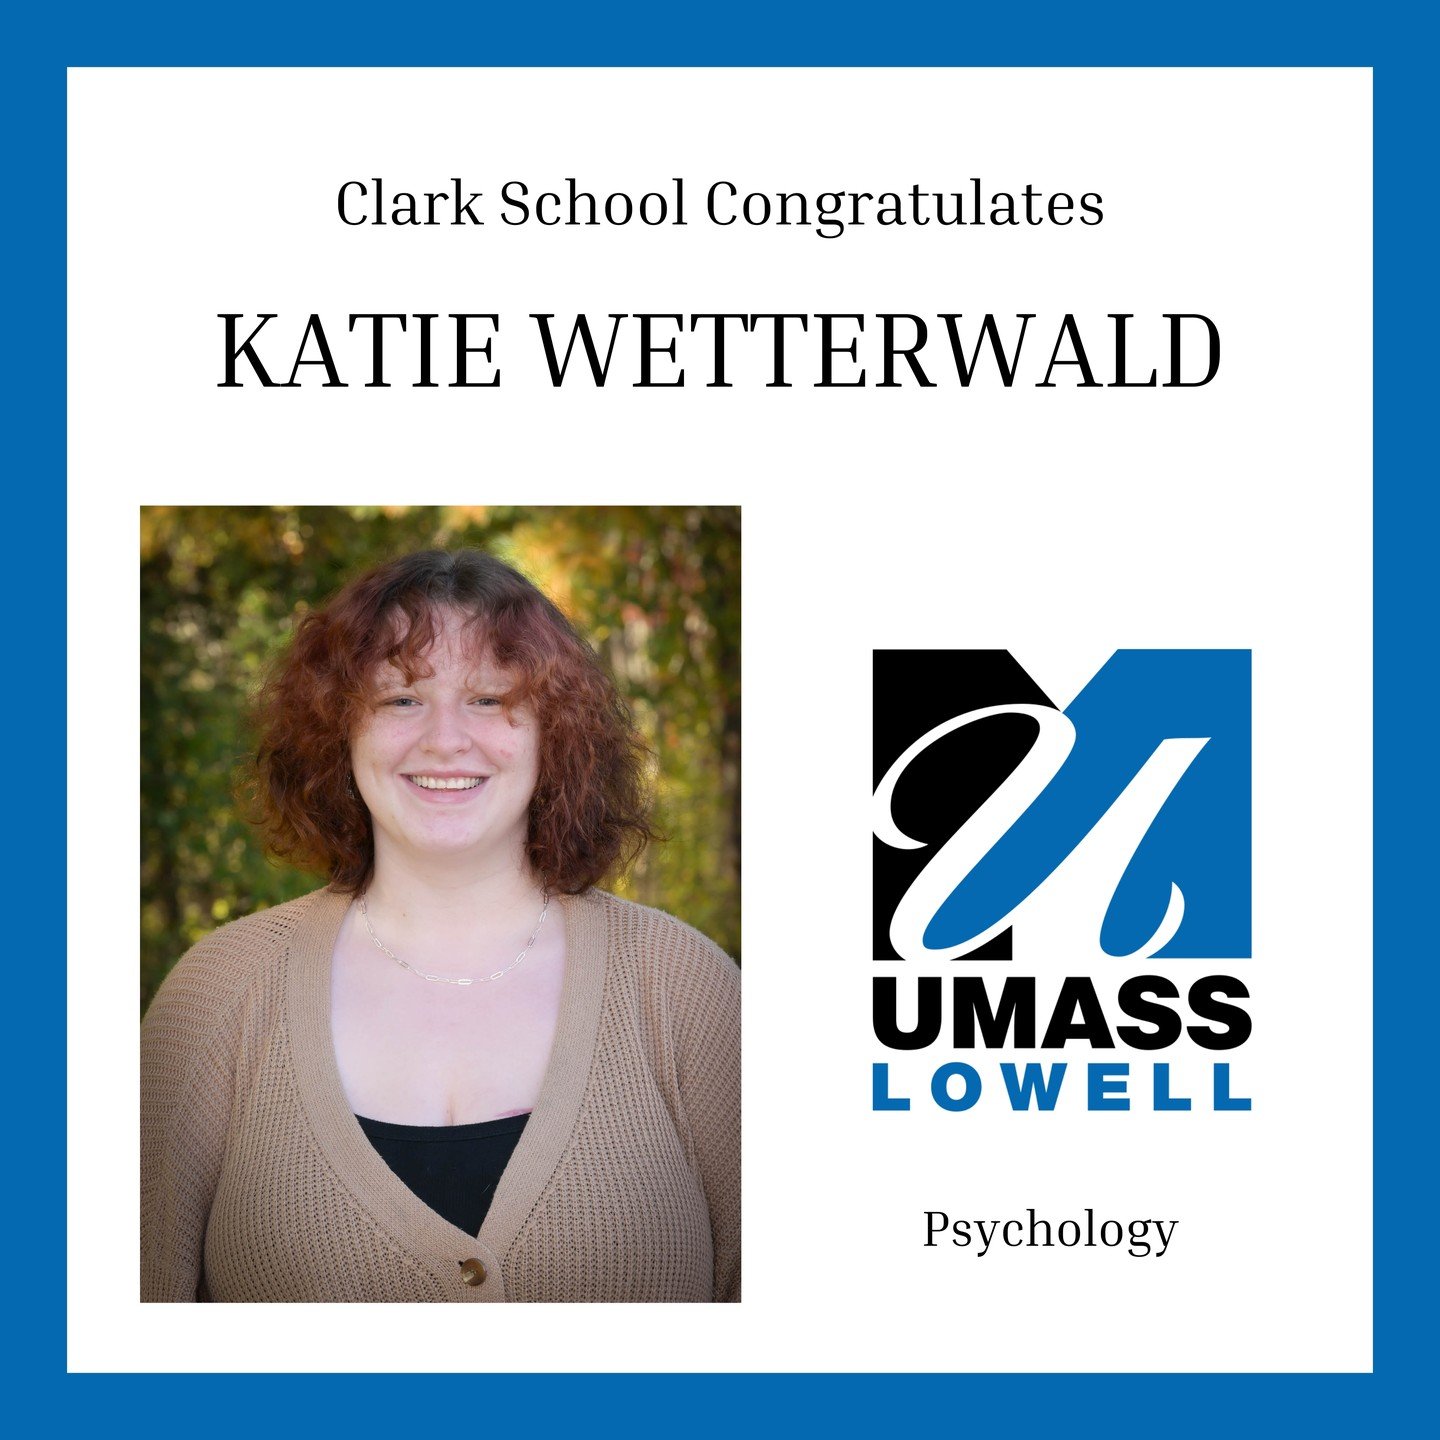 A big congratulations to @katiewetterwald on her acceptance to @umasslowell !